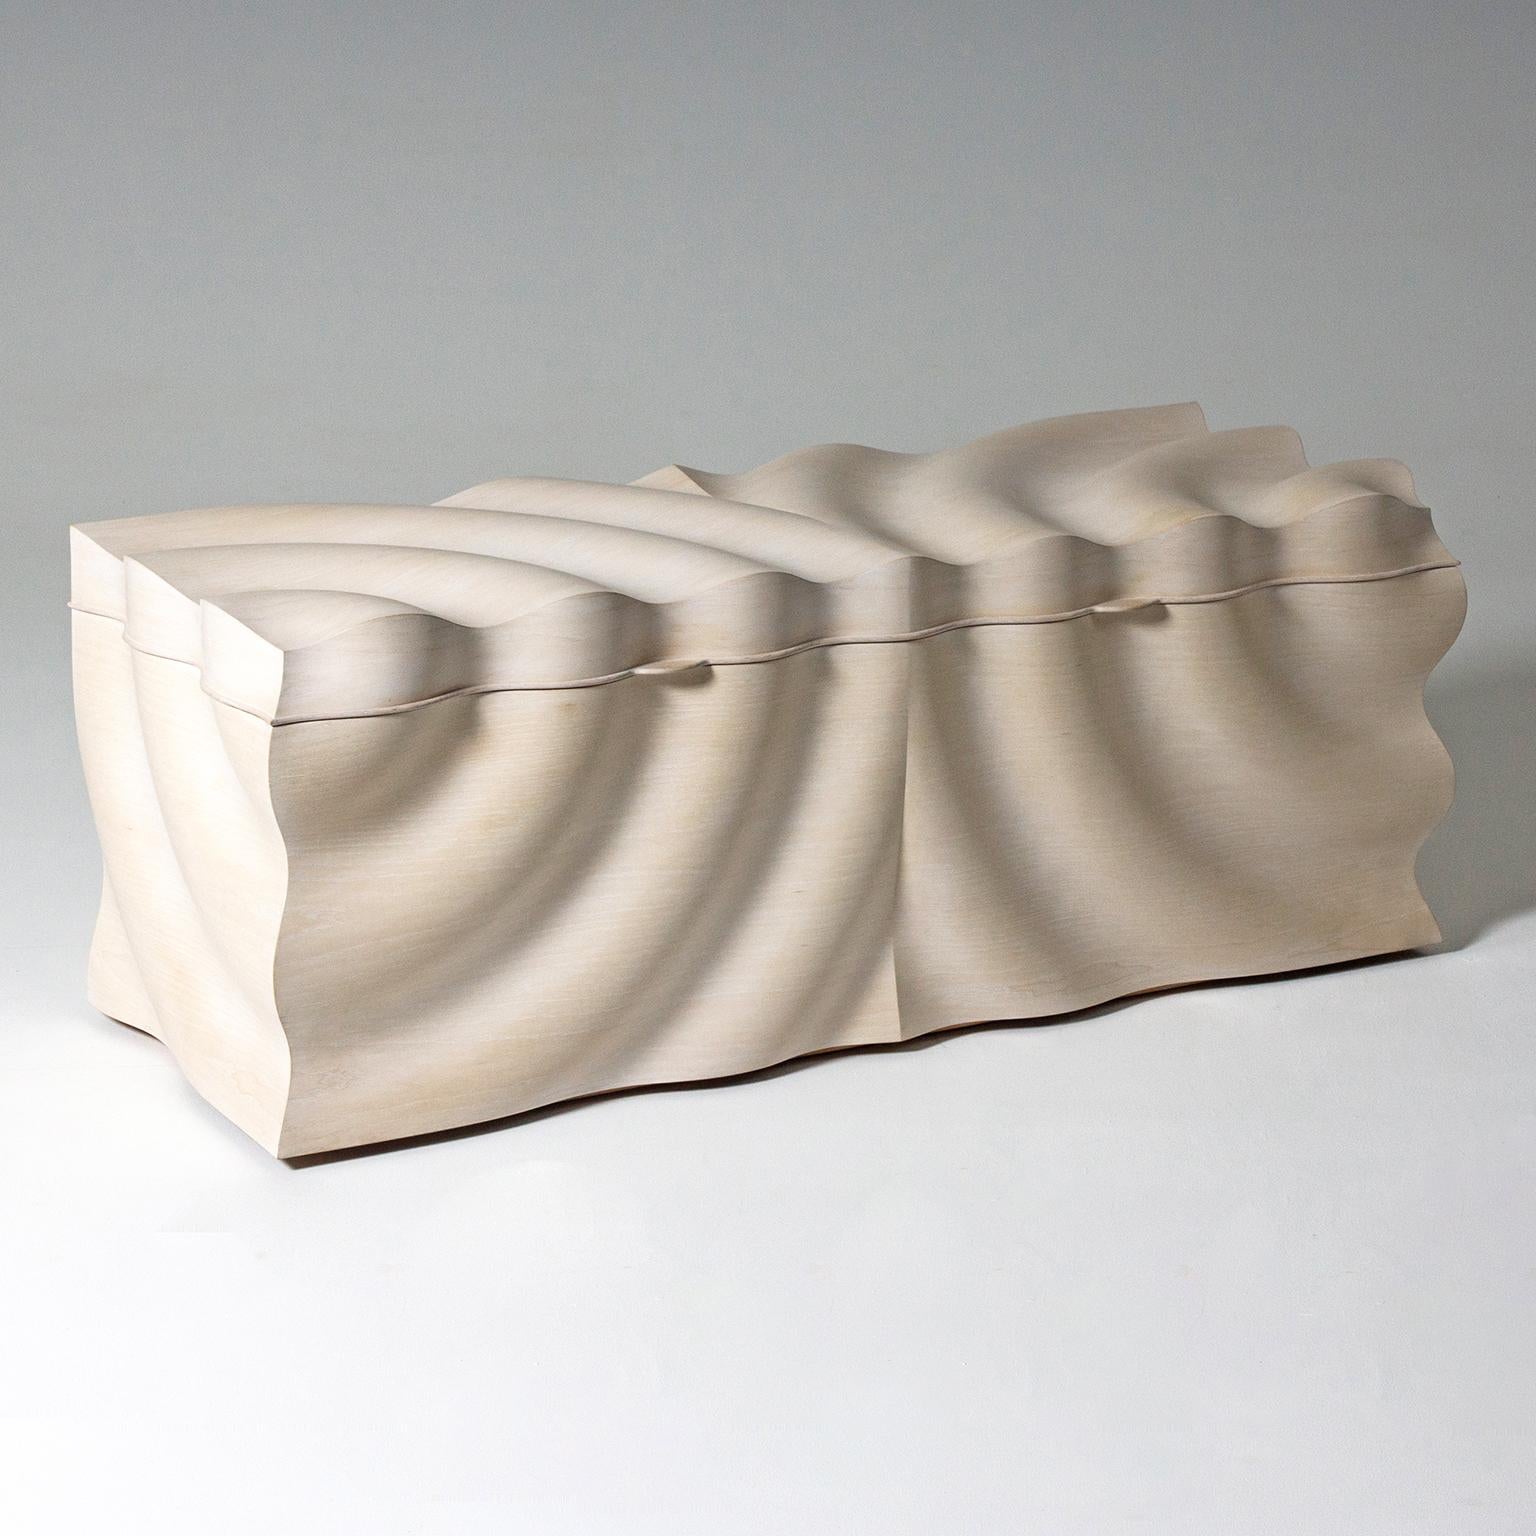 The contemporary rippled 'Reflection' blanket chest by Edward Johnson forms part of his Ripples collection. Inspired by the action of a stone dropping into water, the principal intention was to produce a surface that could replicate the fluidity of